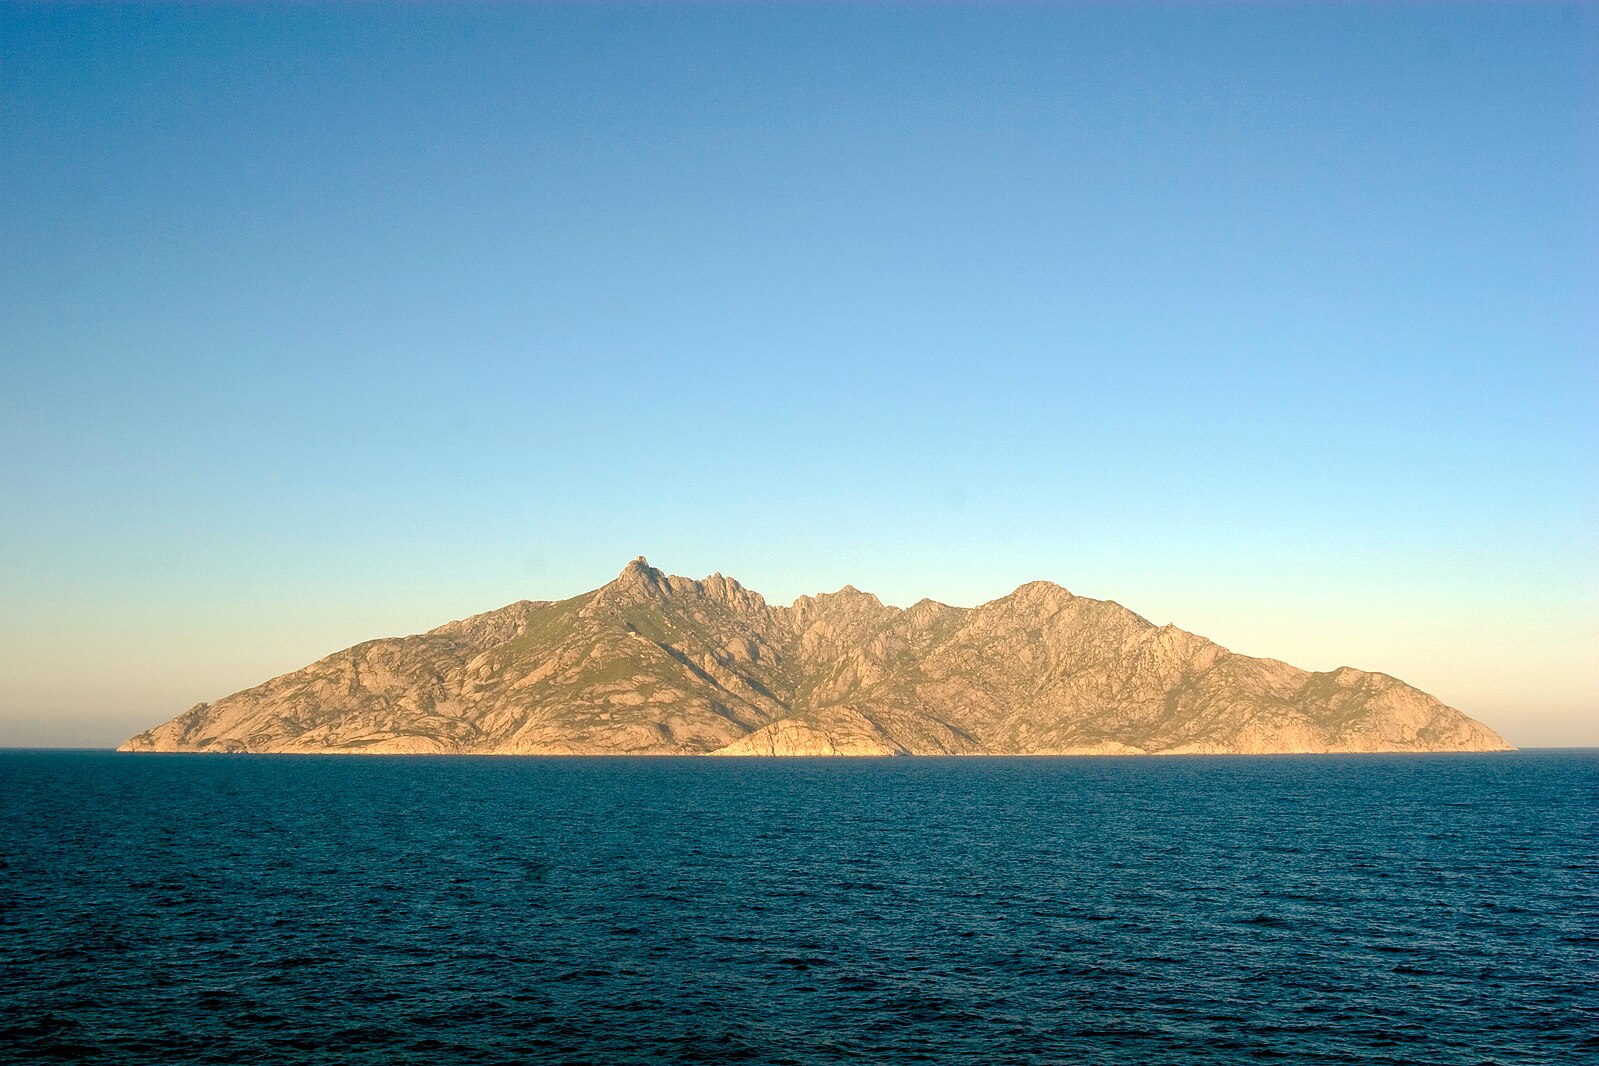 The island of Montecristo view from the sea.